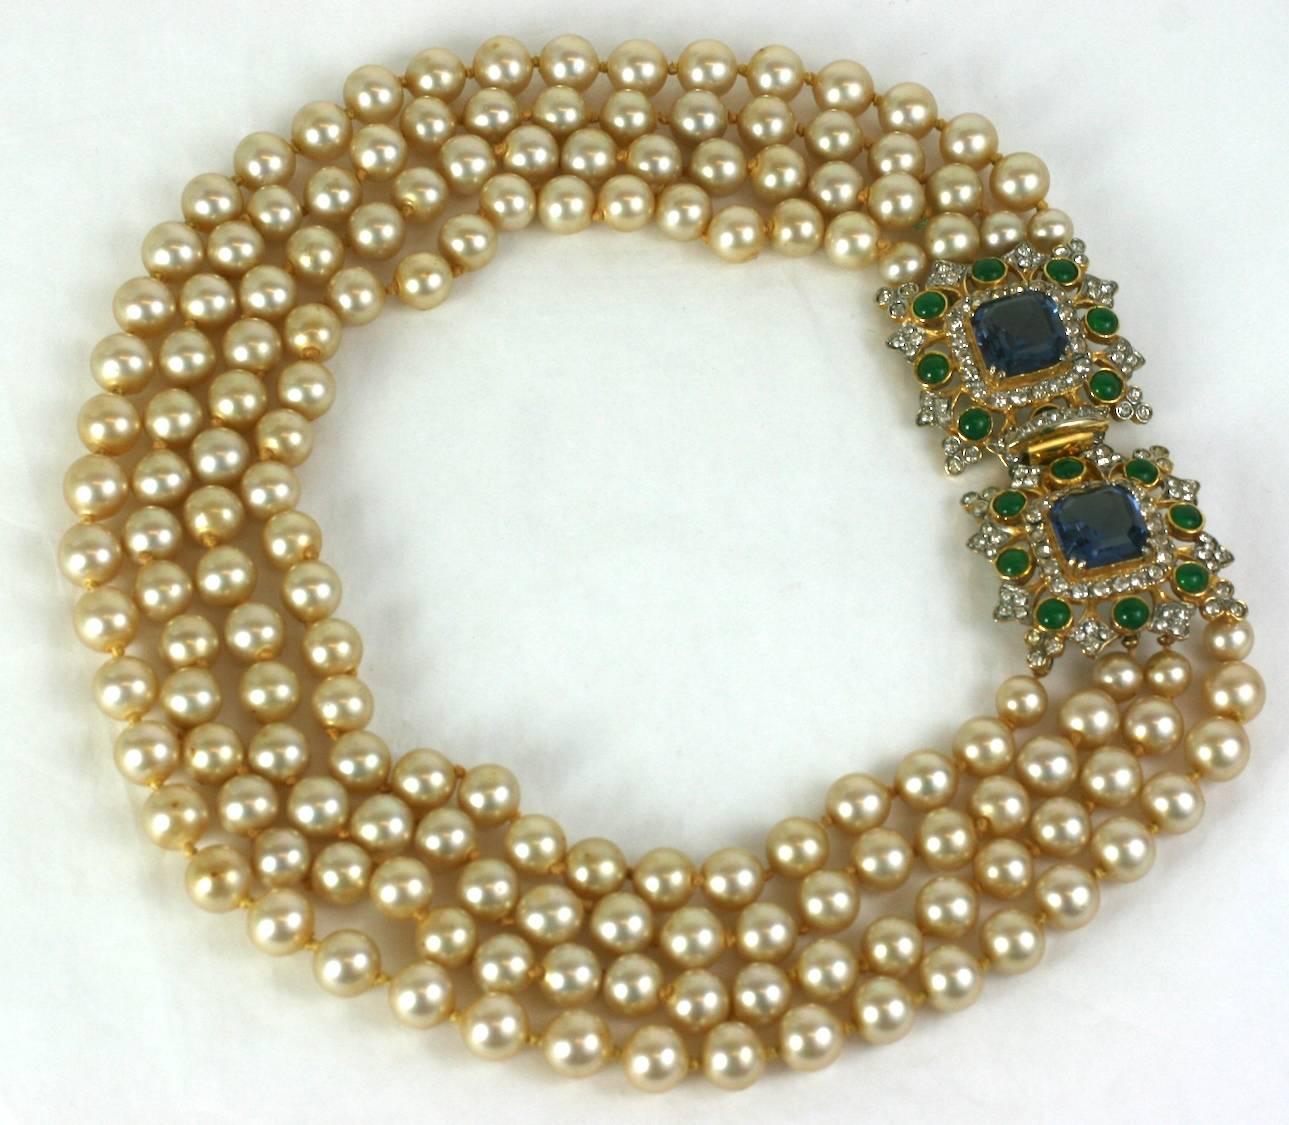 Glamorous Kenneth Jay Lane, Laguna multi strand faux pearl necklace with elaborate jeweled clasp of faux sapphires and emeralds in the style of David Webb. 1960's USA. 
Shortest length 16